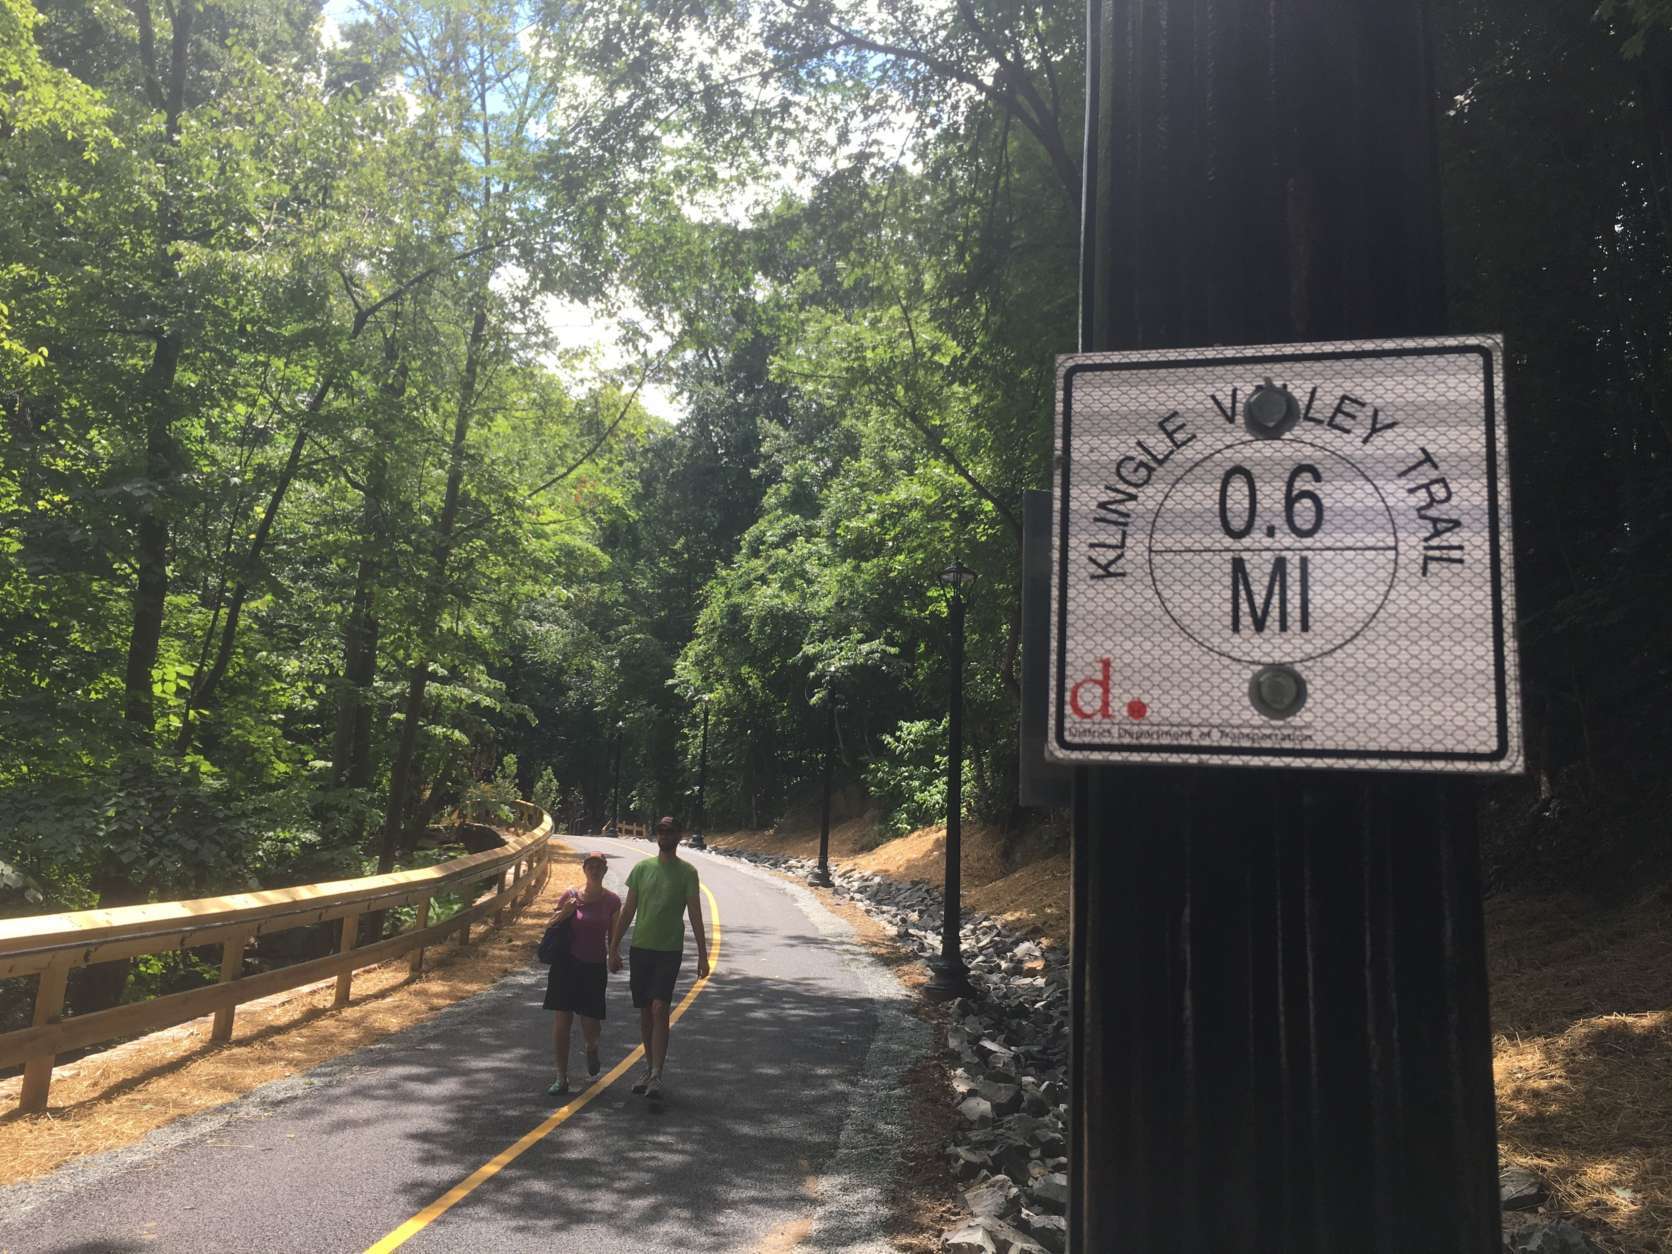 The $6 million Klingle Valley Trail project came into fruition after nearly 24-years of political back-and-forth over the future of defunct Klingle Road, which was originally built in 1831. (WTOP/Mike Murillo)